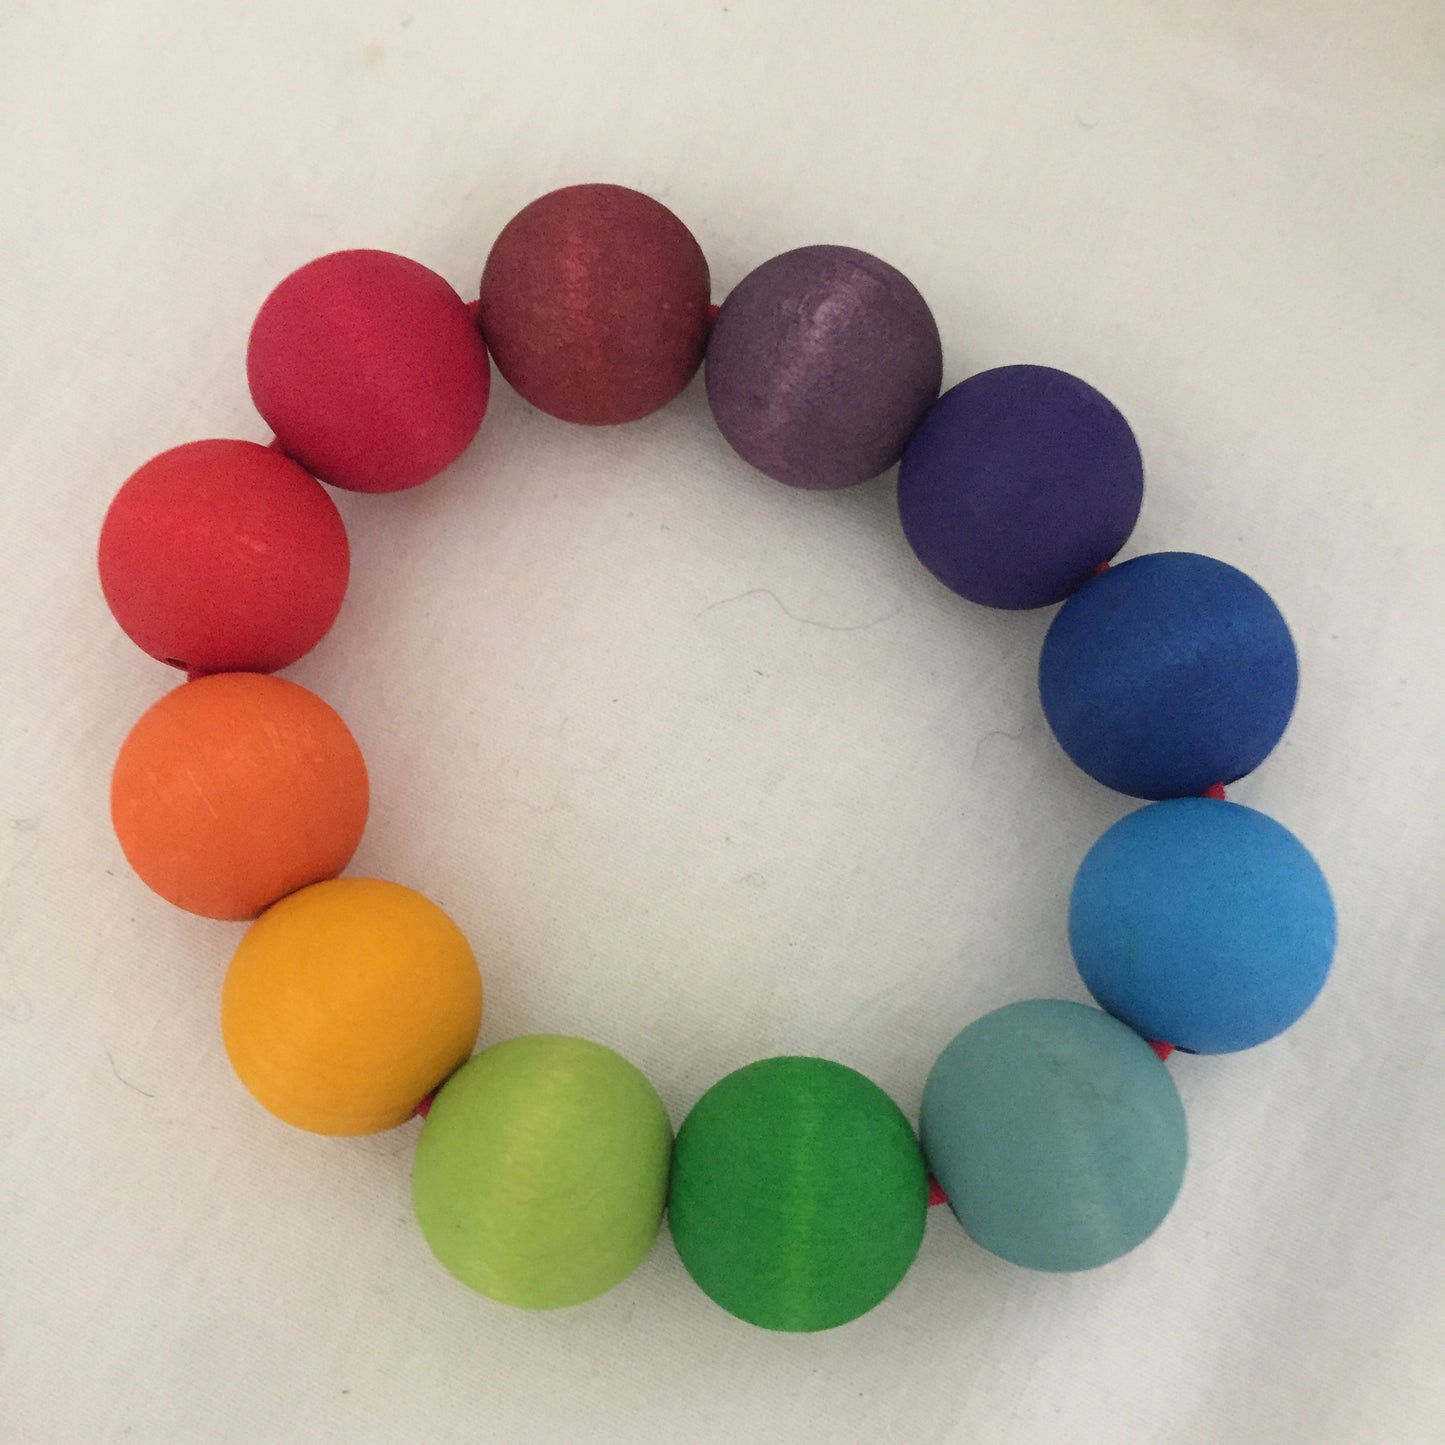 Wooden Toy, Baby - RAINBOW BEAD RING